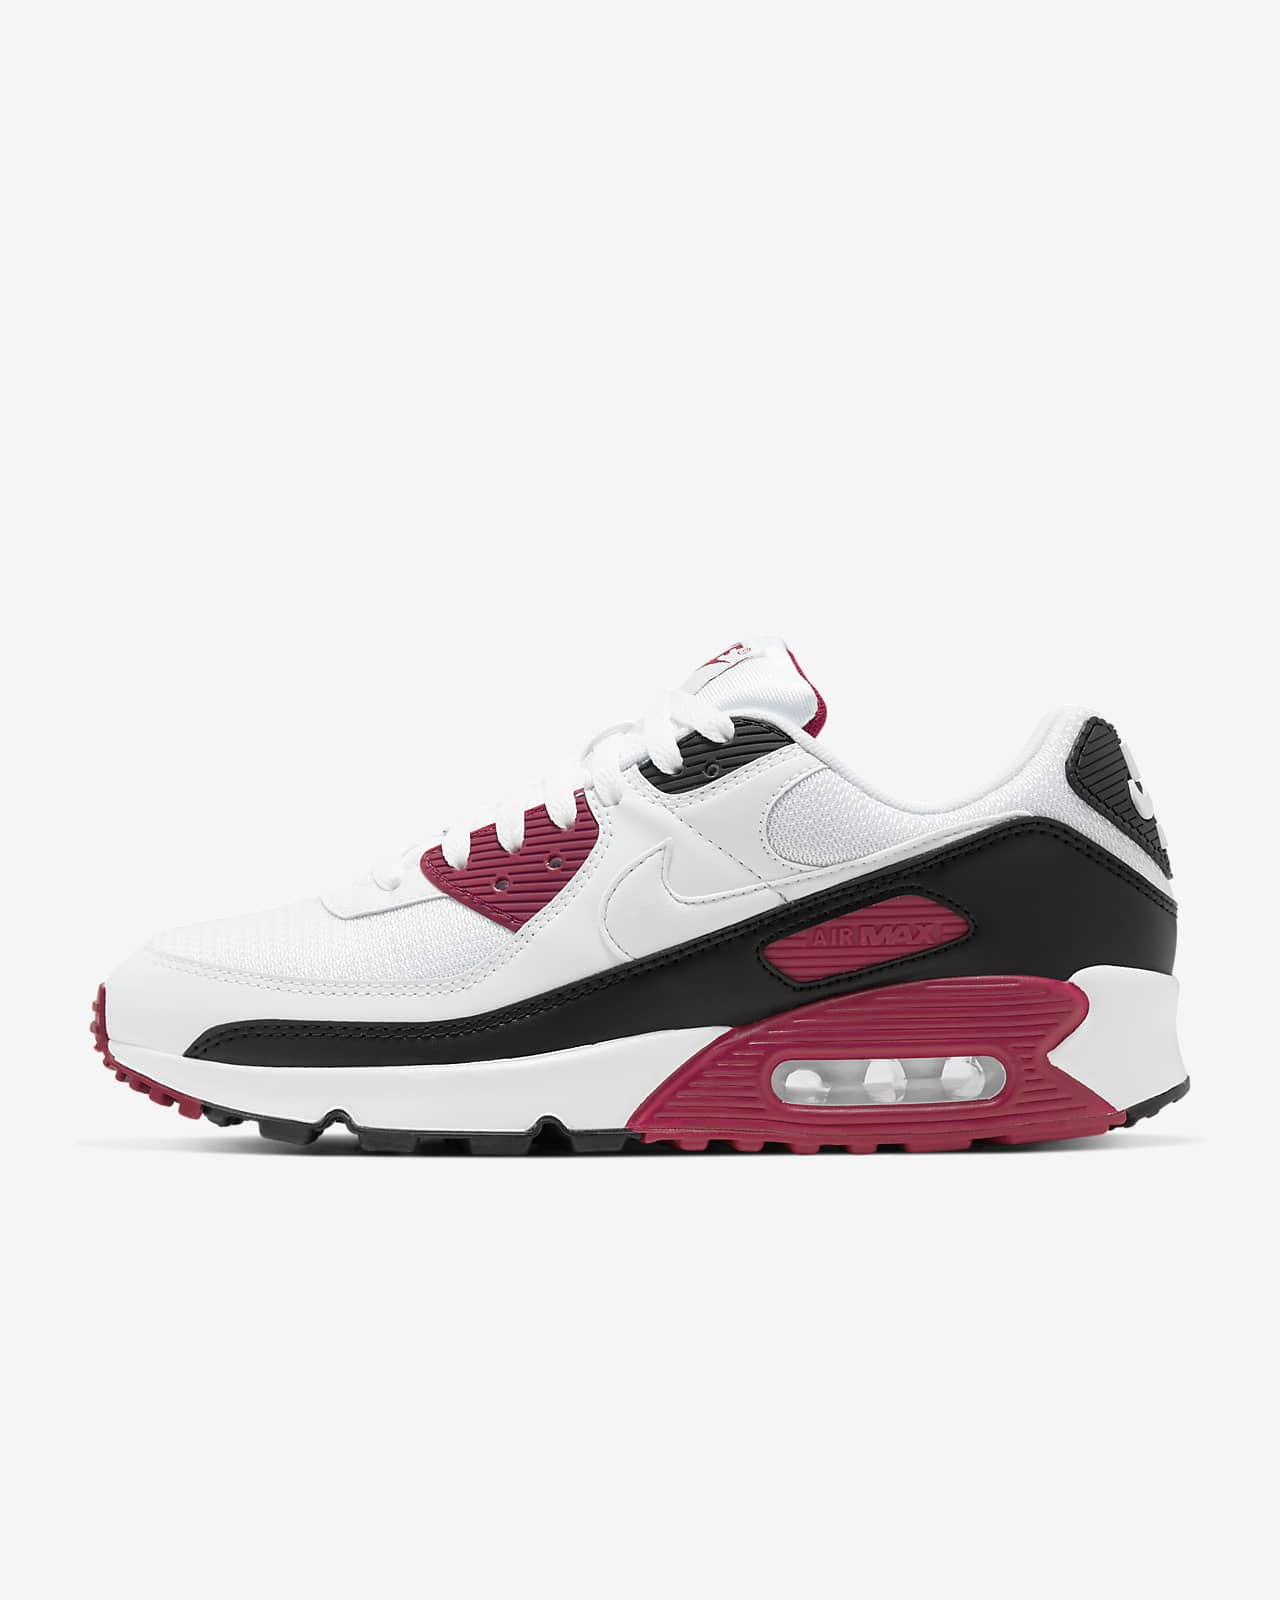 world Soaked hatch nike air max 90 uomo rosse bianche ...